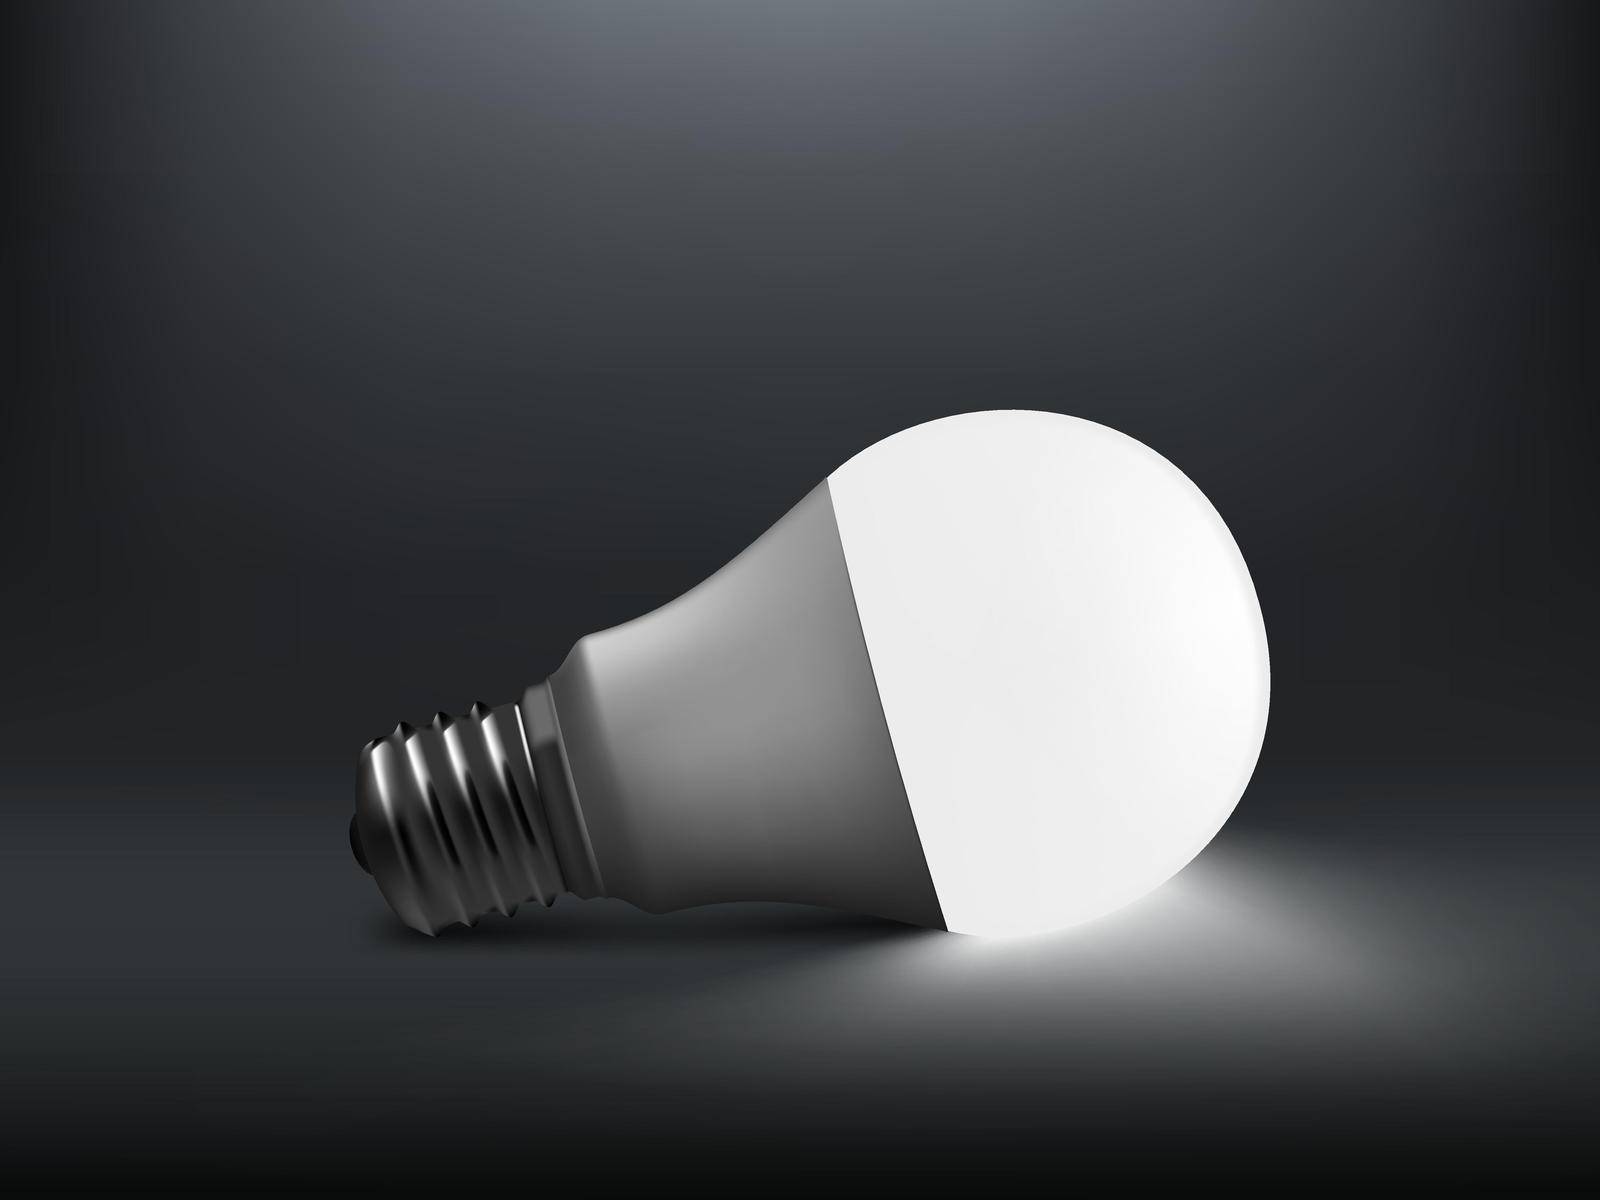 3D LED Light Bulb With Shadow On Floor by VectorThings